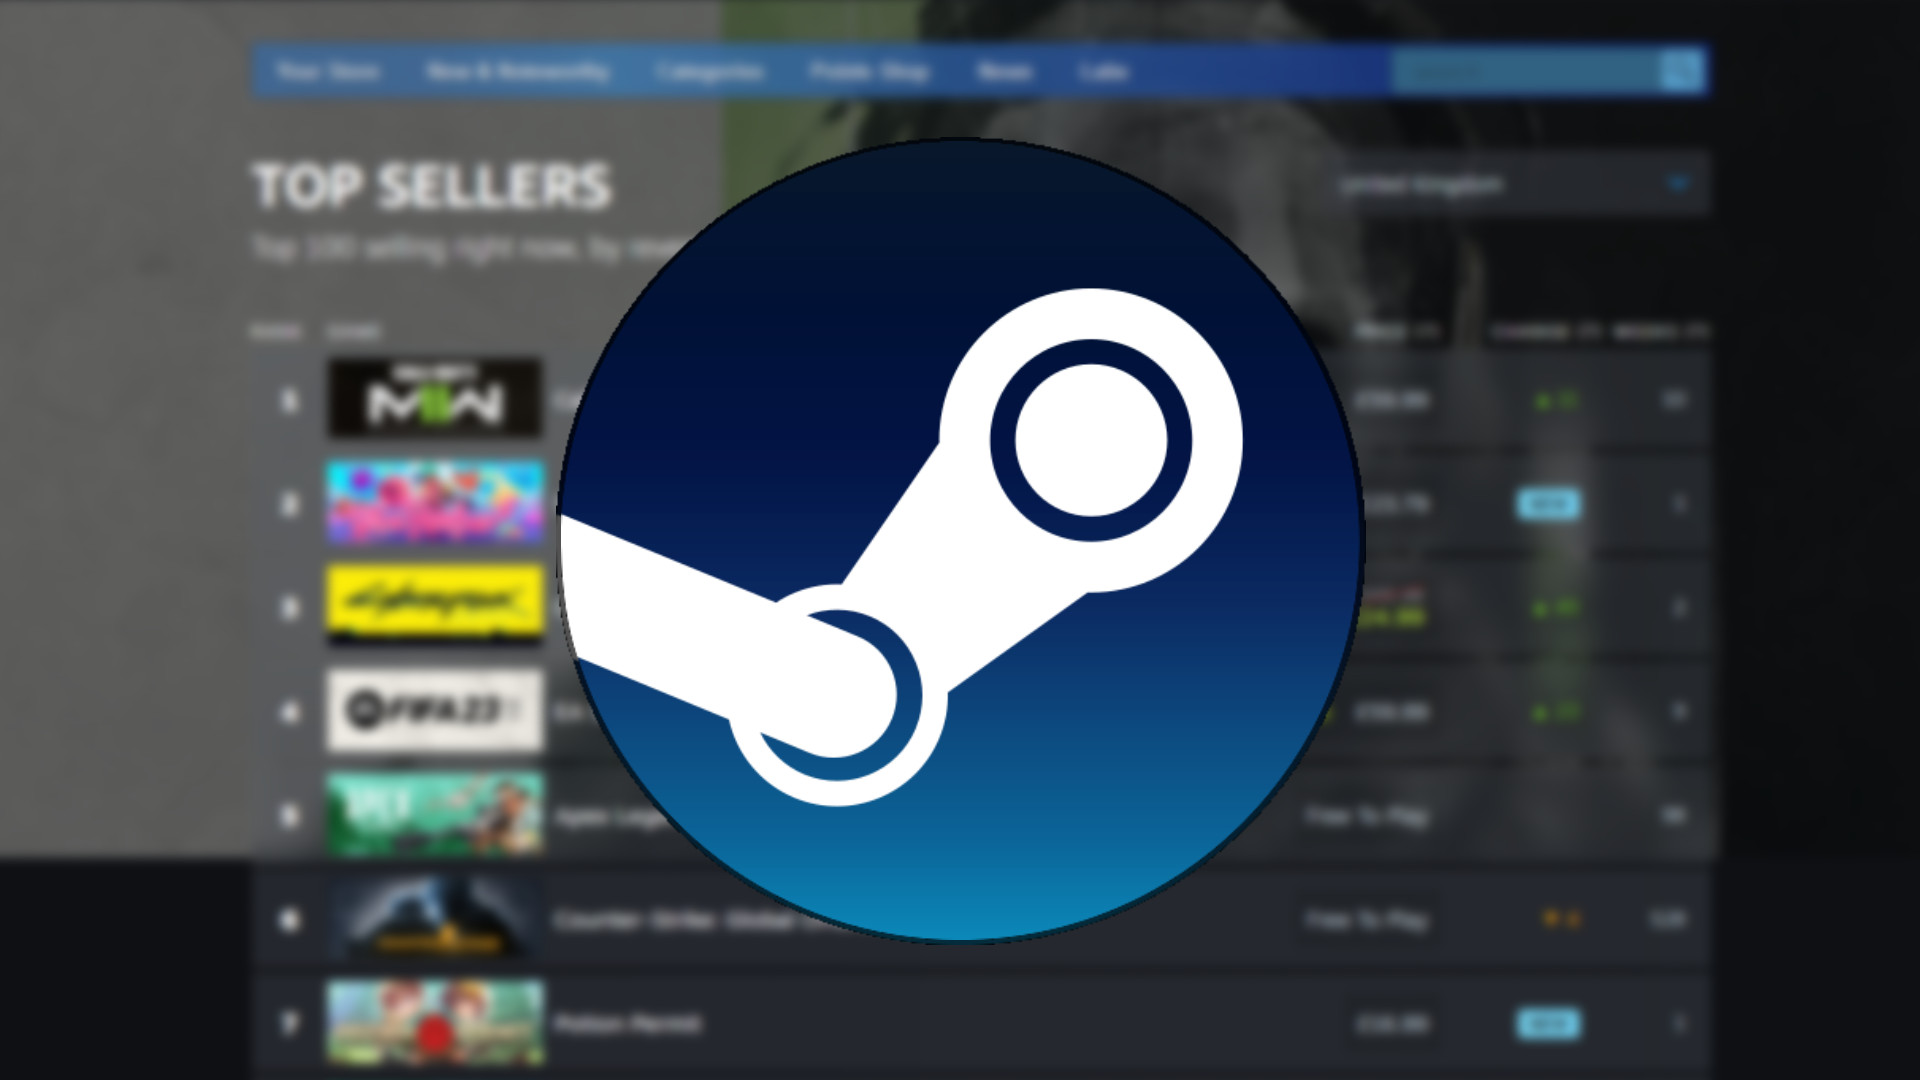 Steam Revamps Stats Into Charts With Better Overview of Most Popular